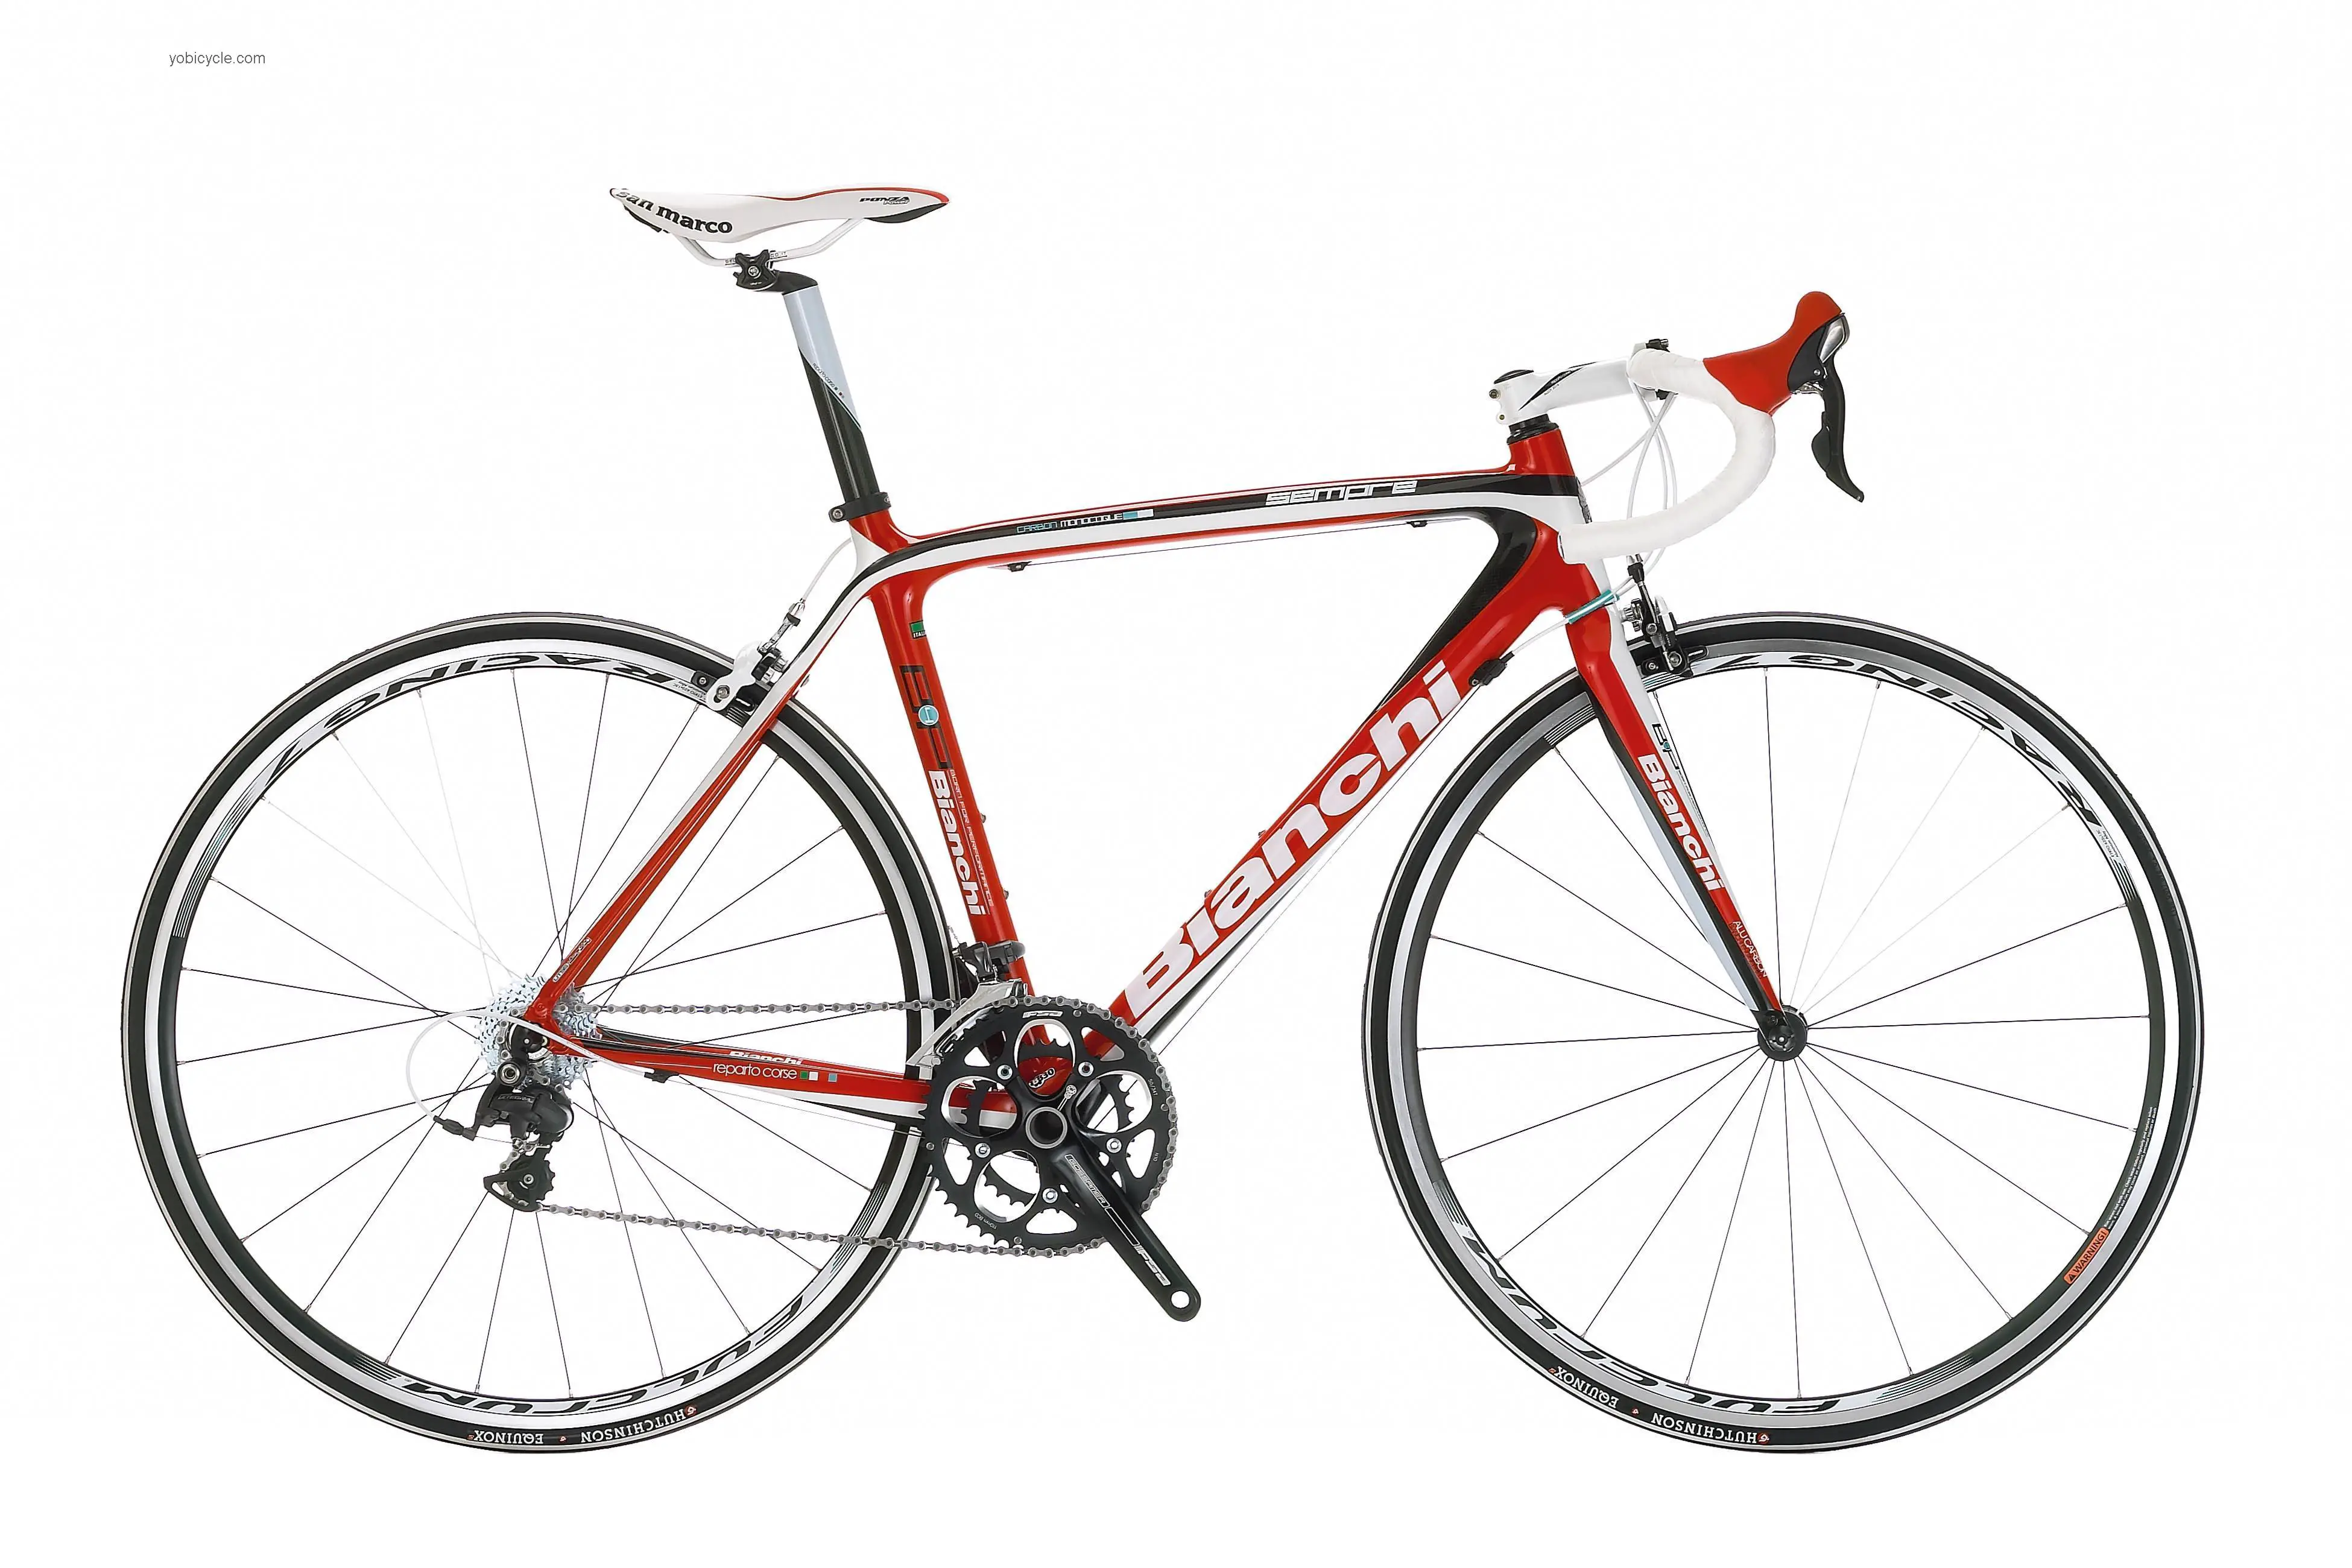 Bianchi Sempre Ultegra competitors and comparison tool online specs and performance